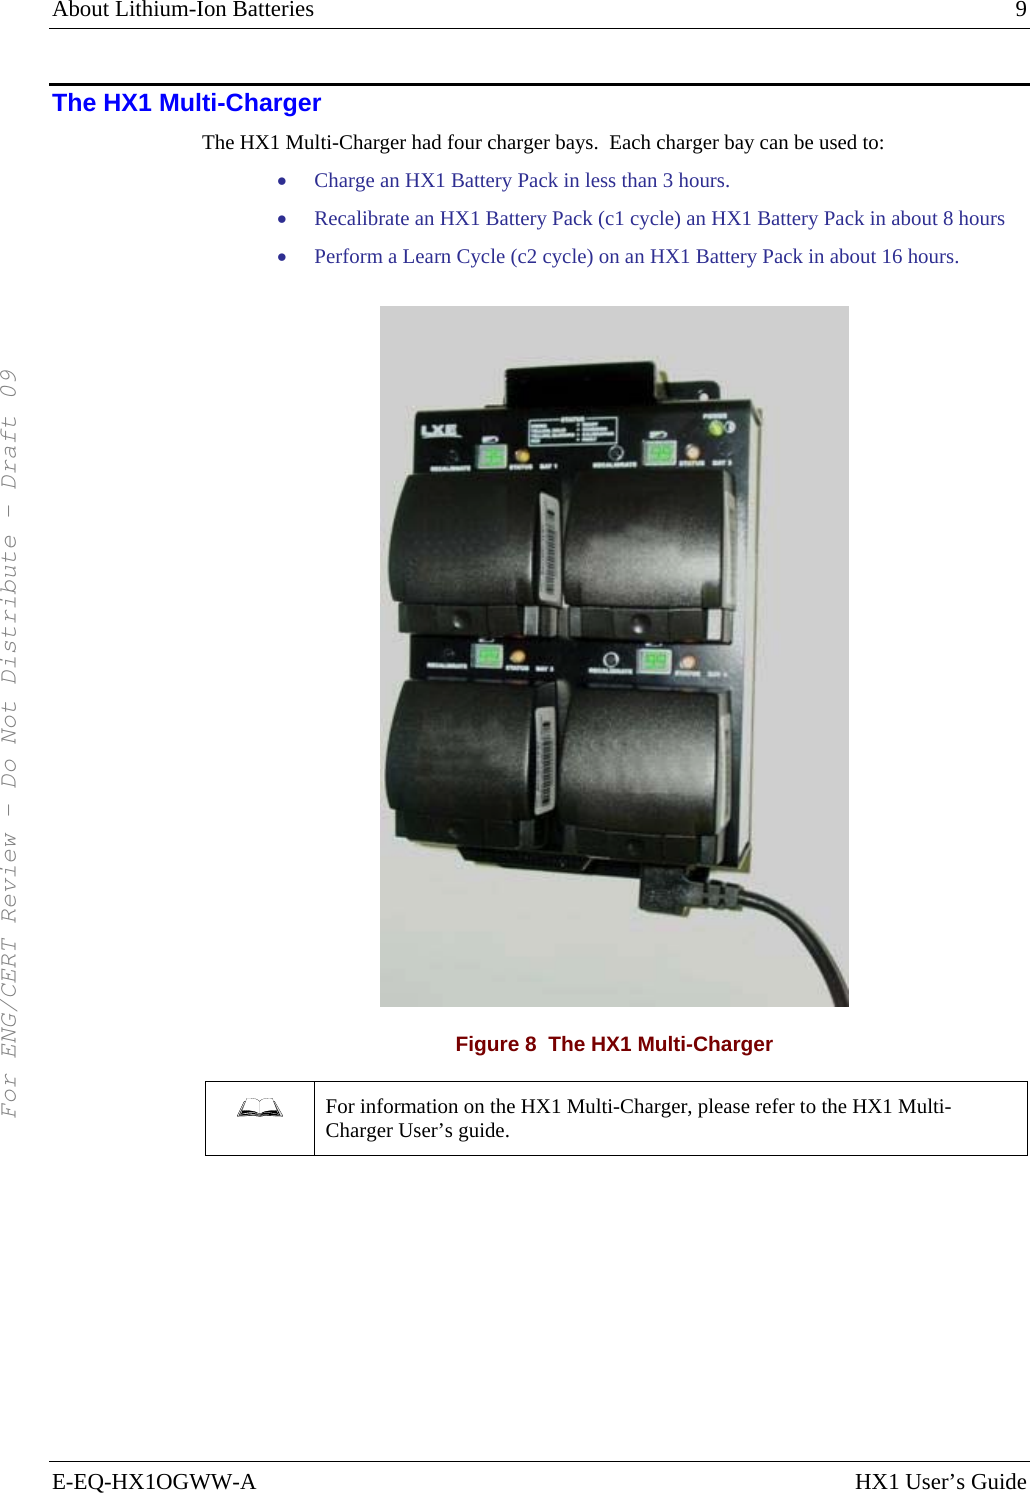 About Lithium-Ion Batteries    9 E-EQ-HX1OGWW-A  HX1 User’s Guide The HX1 Multi-Charger The HX1 Multi-Charger had four charger bays.  Each charger bay can be used to: • Charge an HX1 Battery Pack in less than 3 hours. • Recalibrate an HX1 Battery Pack (c1 cycle) an HX1 Battery Pack in about 8 hours • Perform a Learn Cycle (c2 cycle) on an HX1 Battery Pack in about 16 hours.  Figure 8  The HX1 Multi-Charger  For information on the HX1 Multi-Charger, please refer to the HX1 Multi-Charger User’s guide.     For ENG/CERT Review - Do Not Distribute - Draft 09